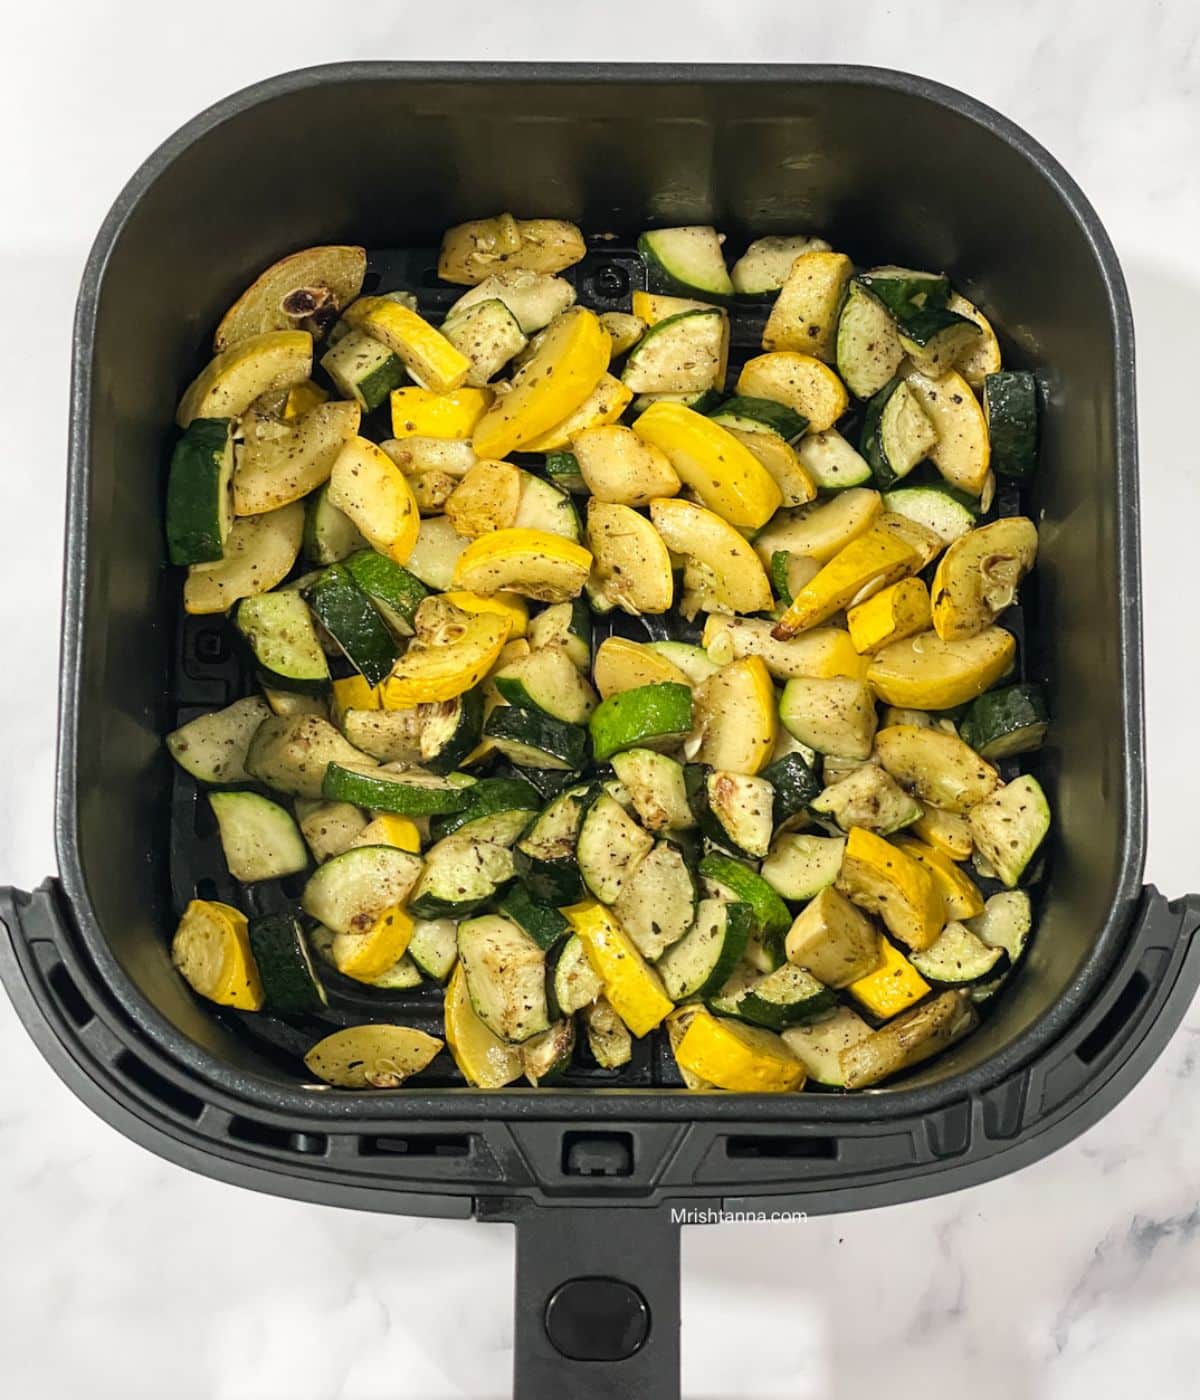 Air fryer basket is with zucchini and squash.